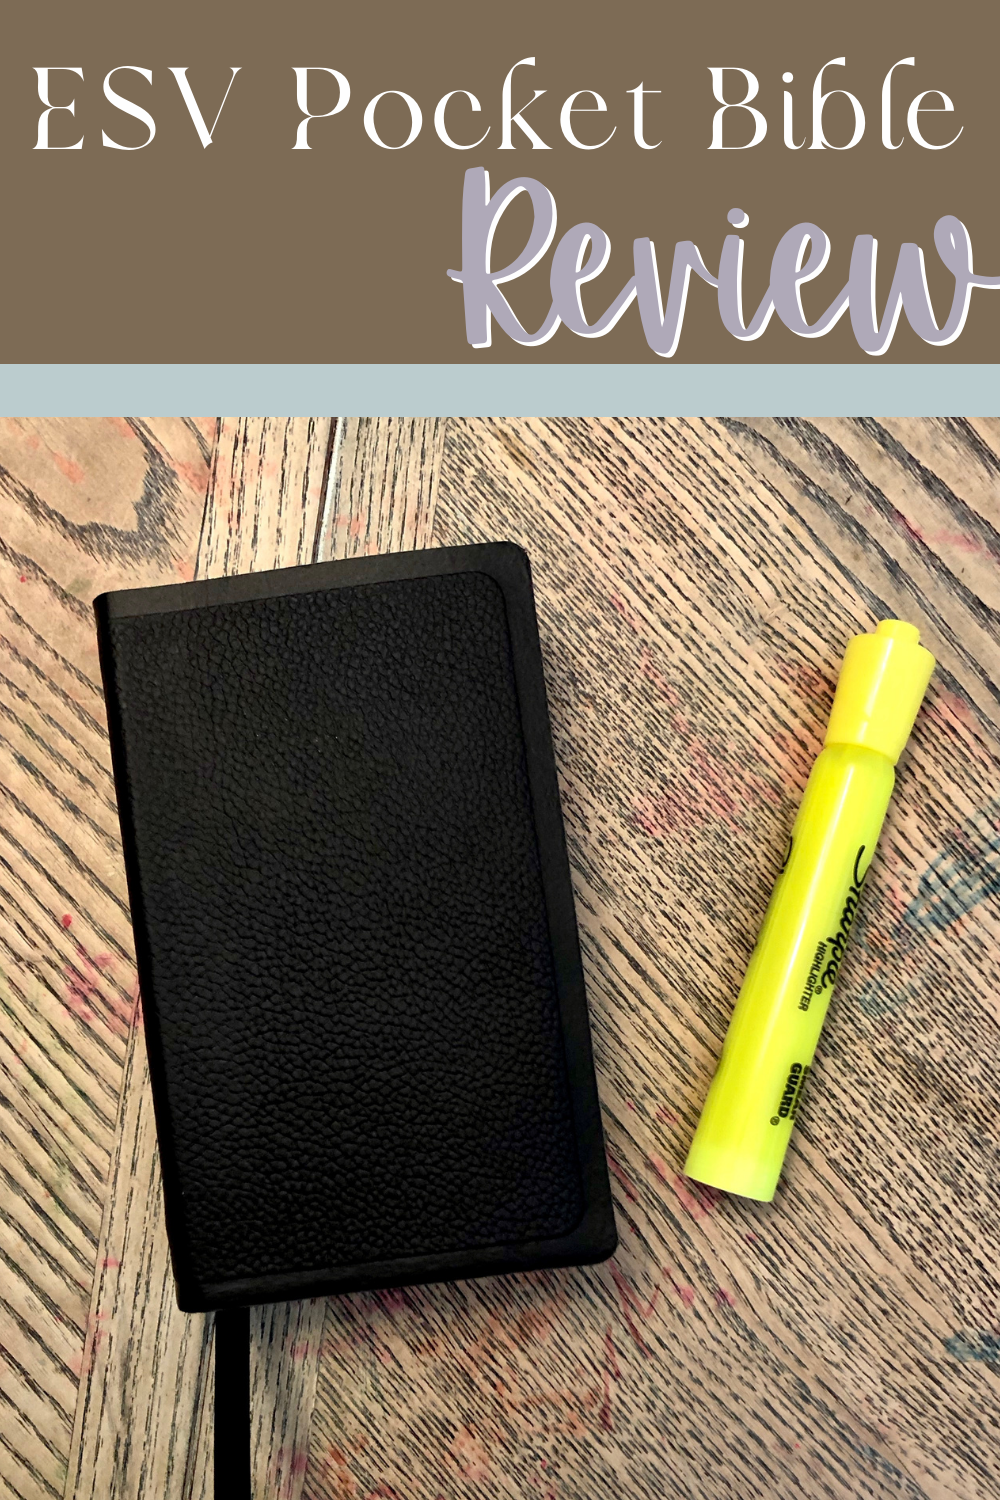 Image of ESV Pocket Bible next to a highlighter for size reference with title "ESV Pocket Bible Review".